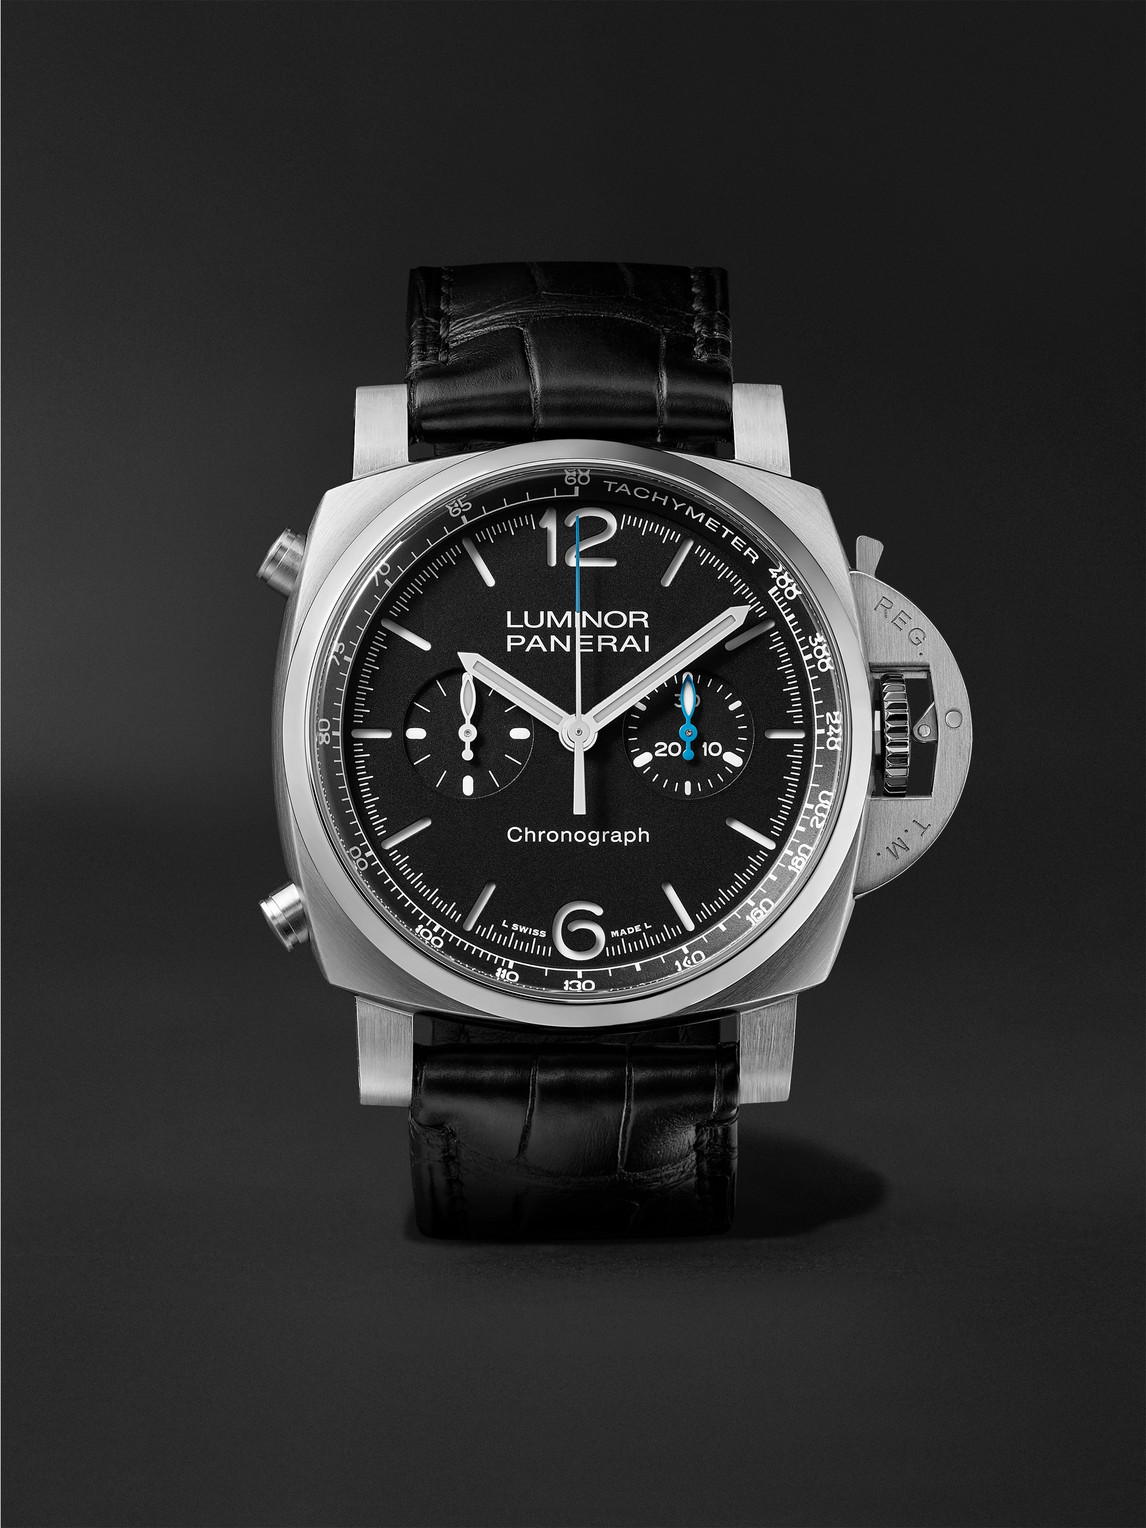 Panerai Luminor Chrono Automatic Chronograph 44mm Stainless Steel And Alligator Watch, Ref. No. Pam01109 In Black